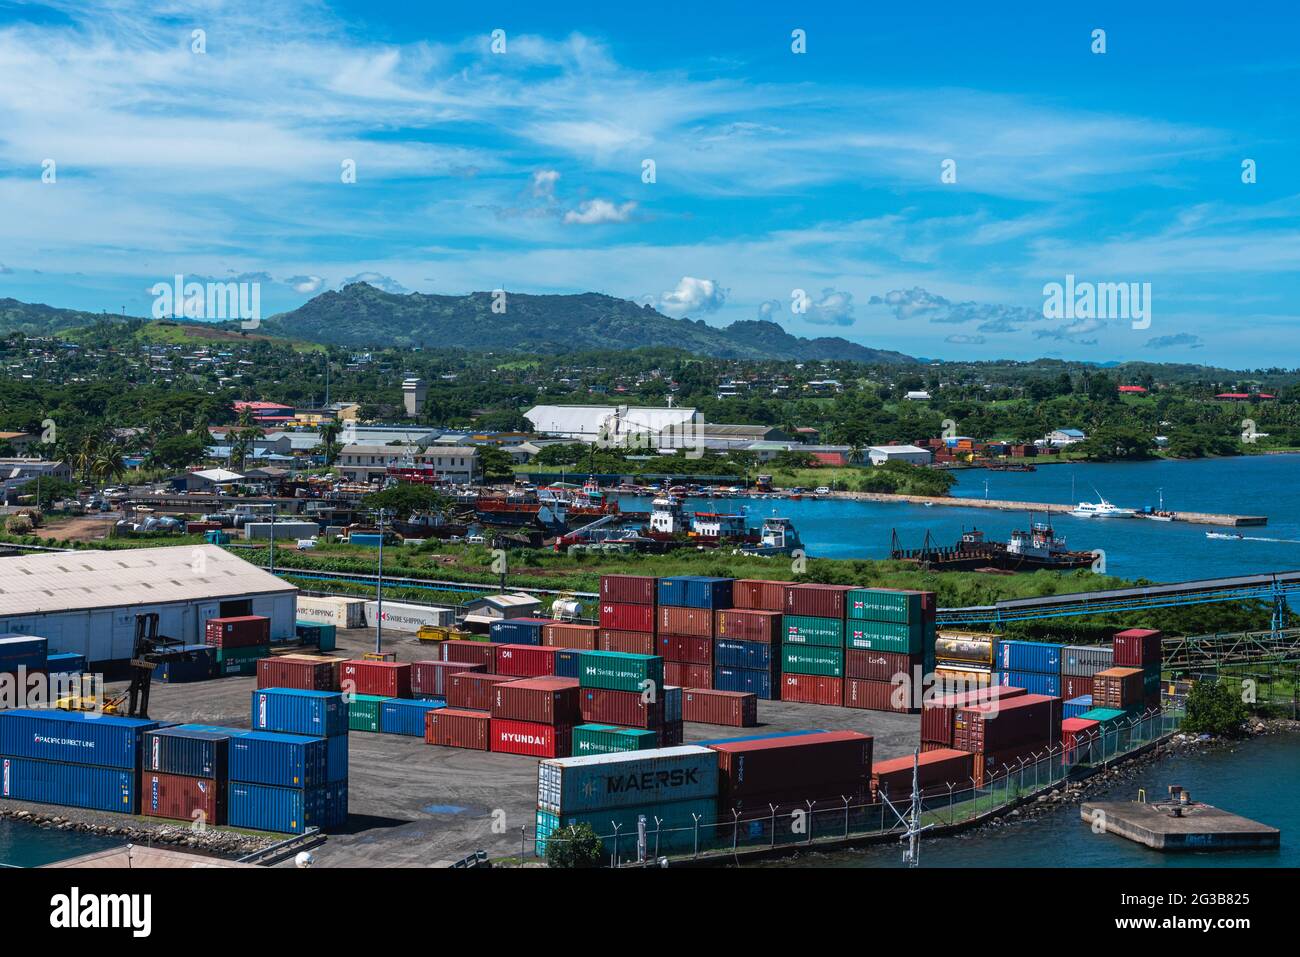 Lautoka, Fiji, South Pacific -- March 7, 2018. A photo overlooking a working commercial port on the island of Lautoka in the South Pacific. Stock Photo